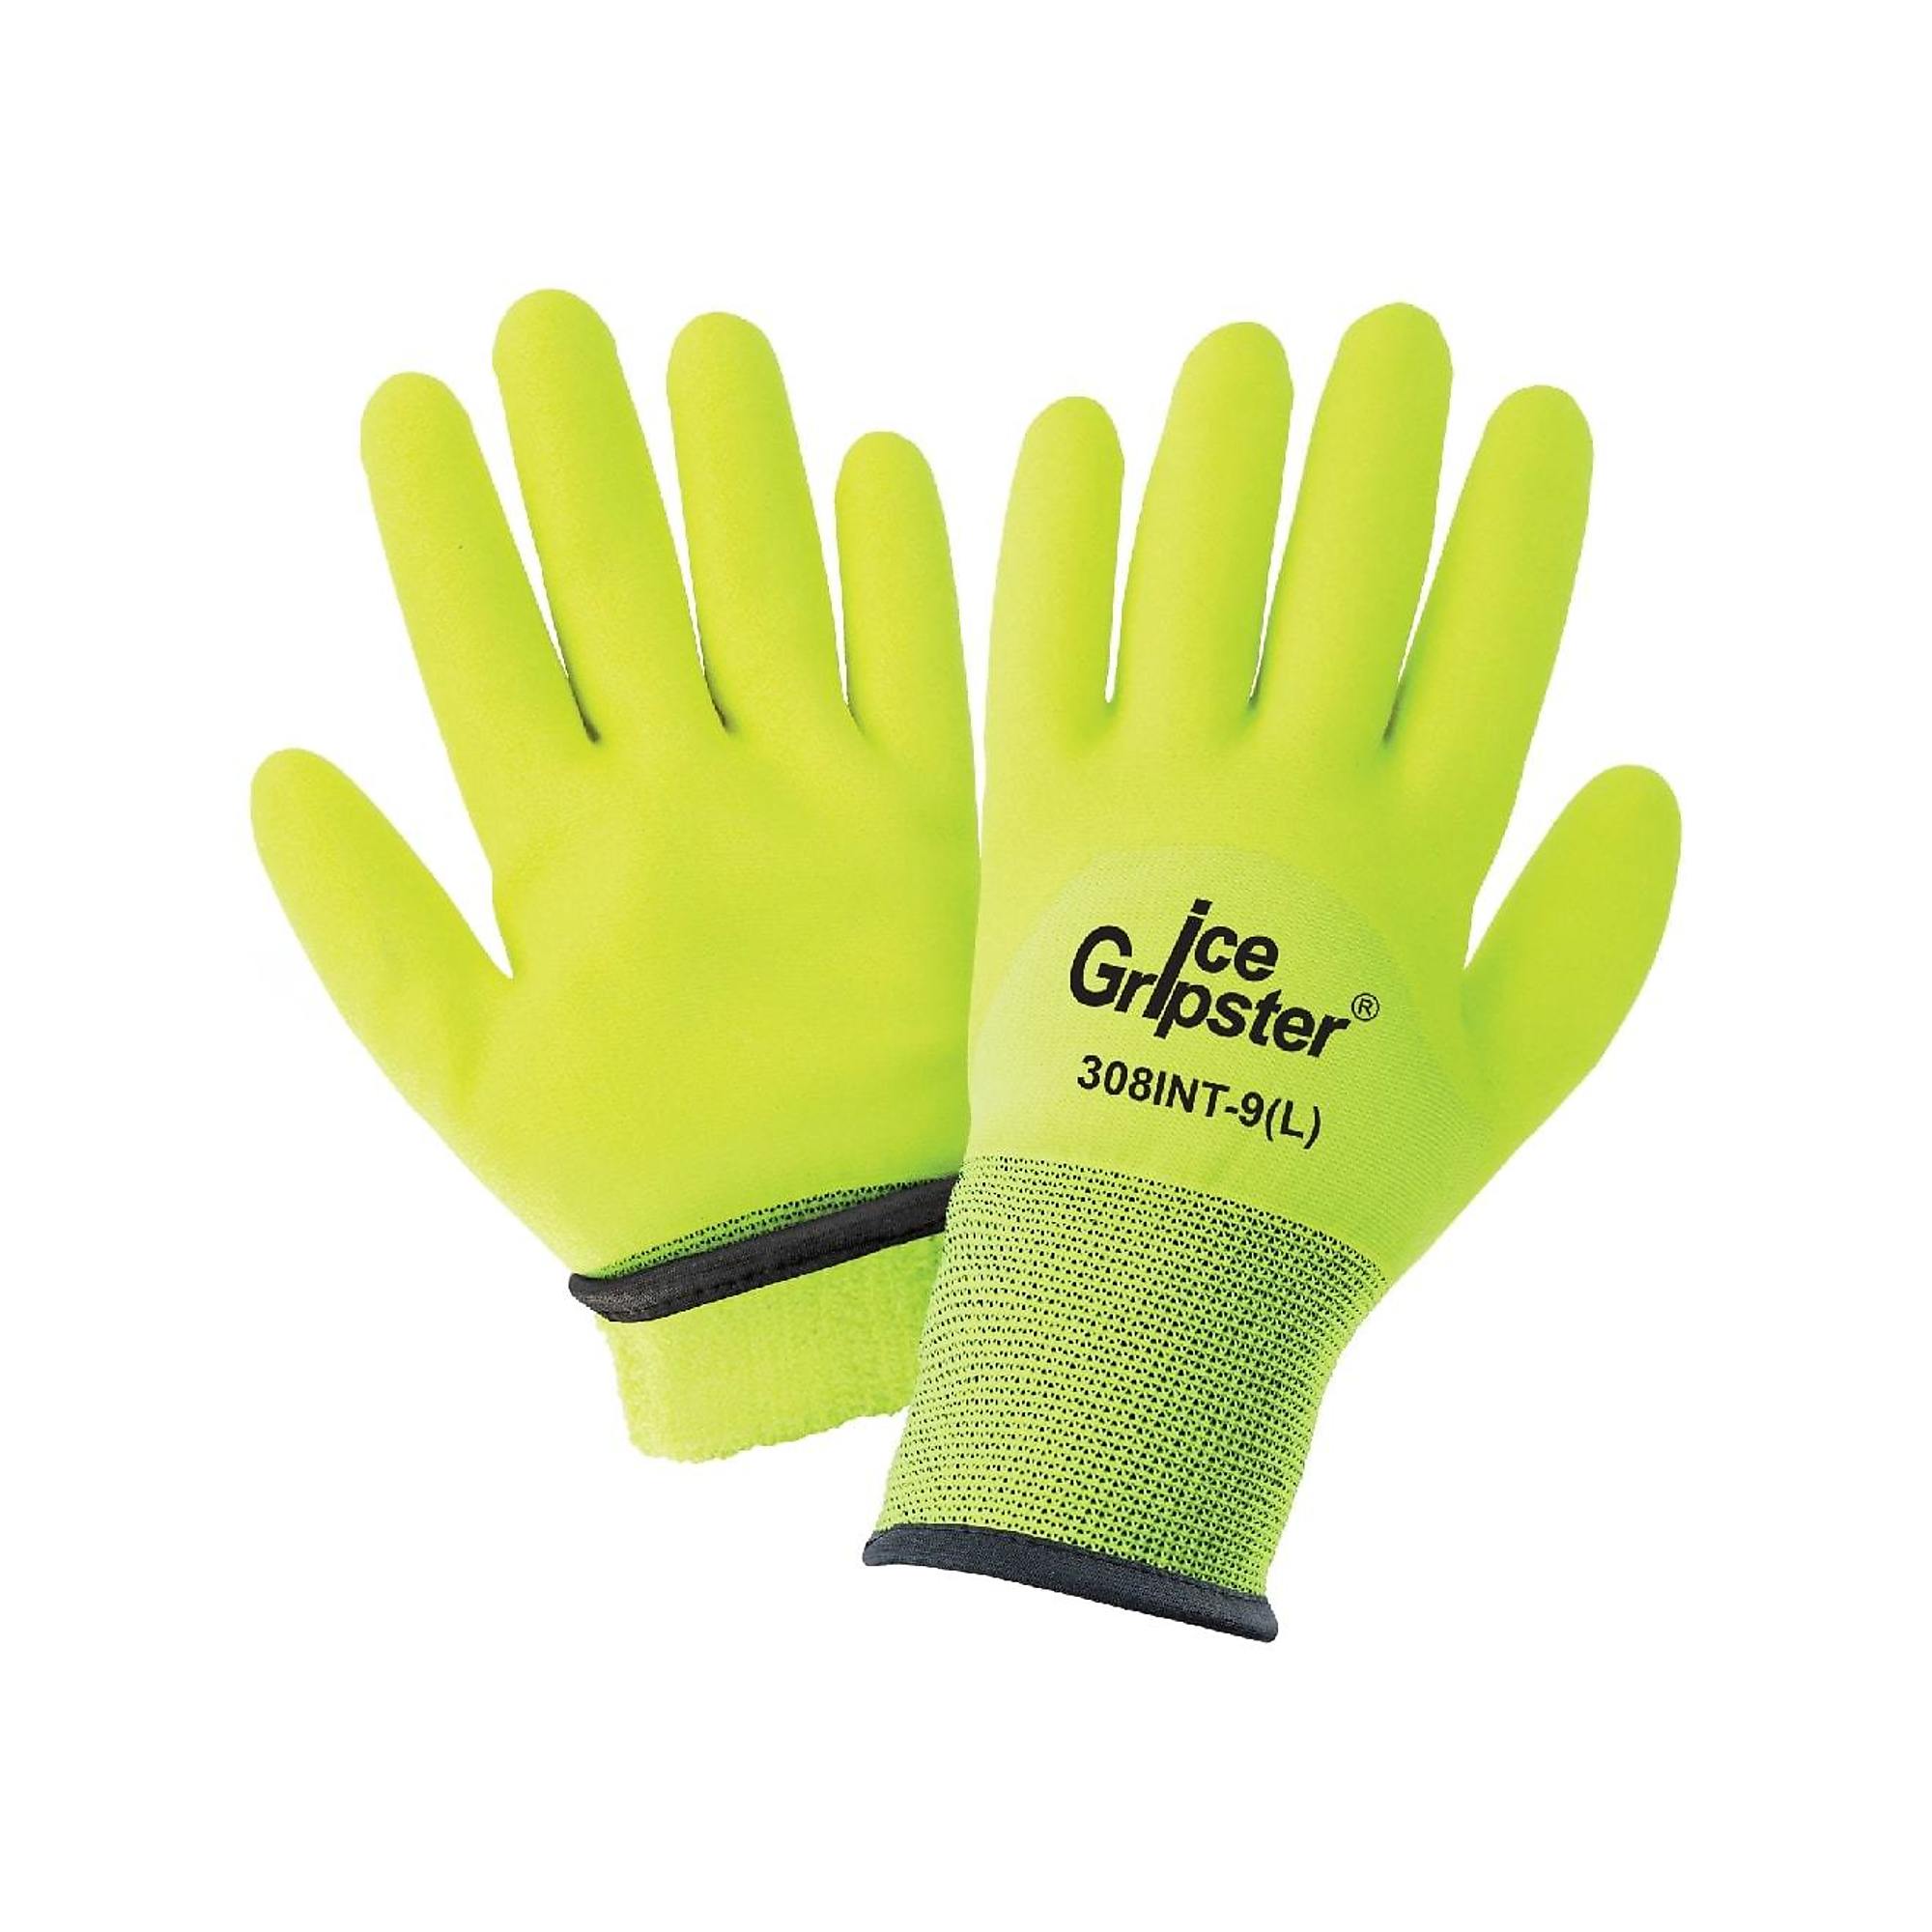 Global Glove Ice Gripster , HV Yel, Insulated, PVC Dip,Cut Resistant A2 Gloves- 12 Pairs, Size S, Color High Visibility Yellow/Green, Included (qty.)